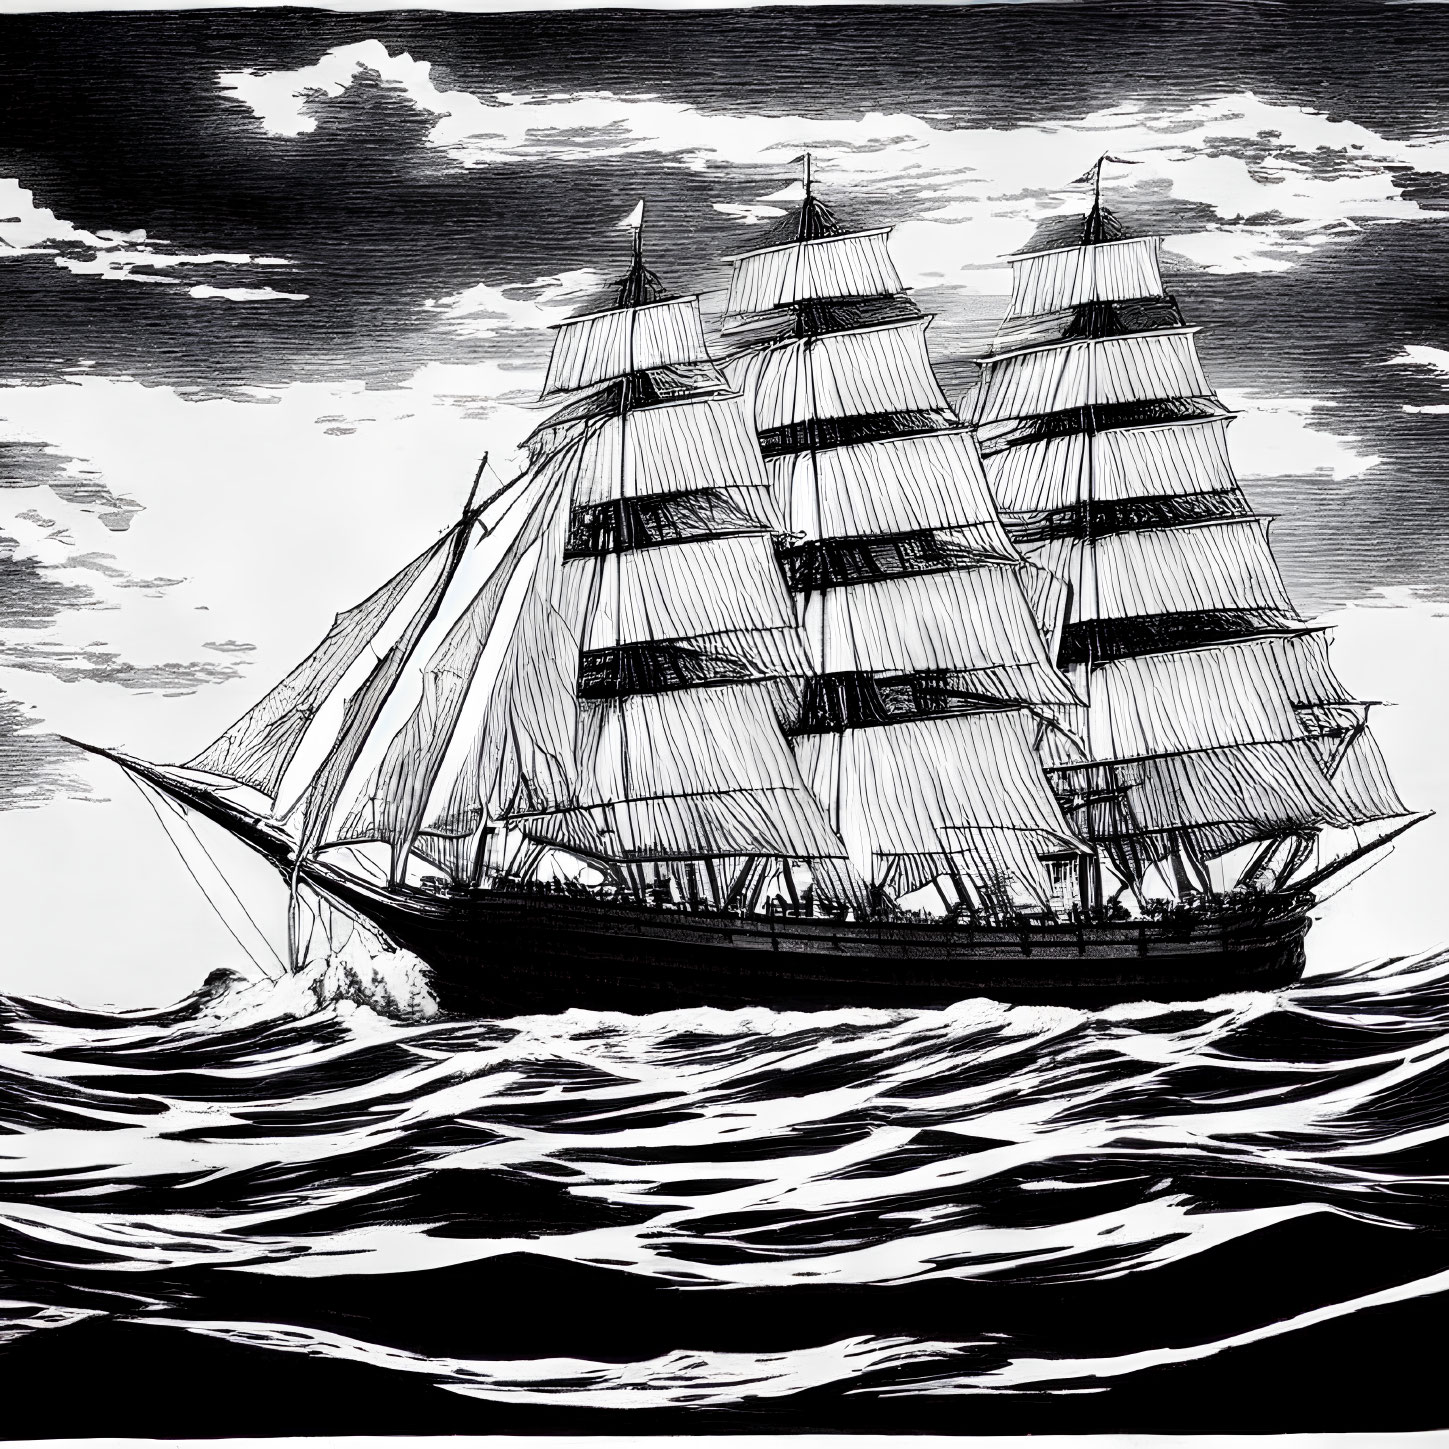 Detailed black and white tall ship illustration on wavy seas with cloudy sky